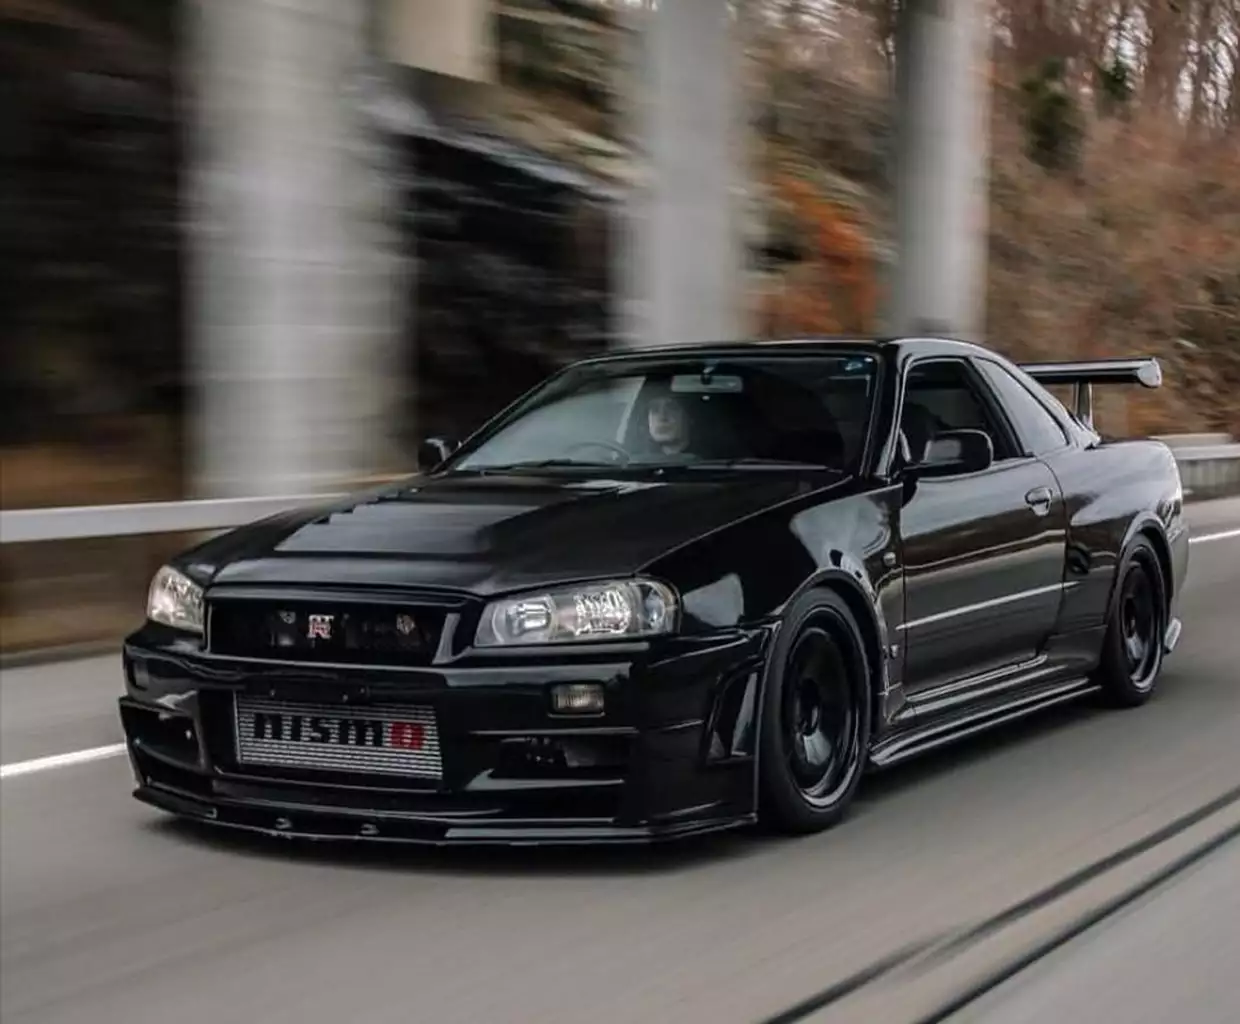 Nissan Skyline GT-R R34 Review, facts and photos. 508355